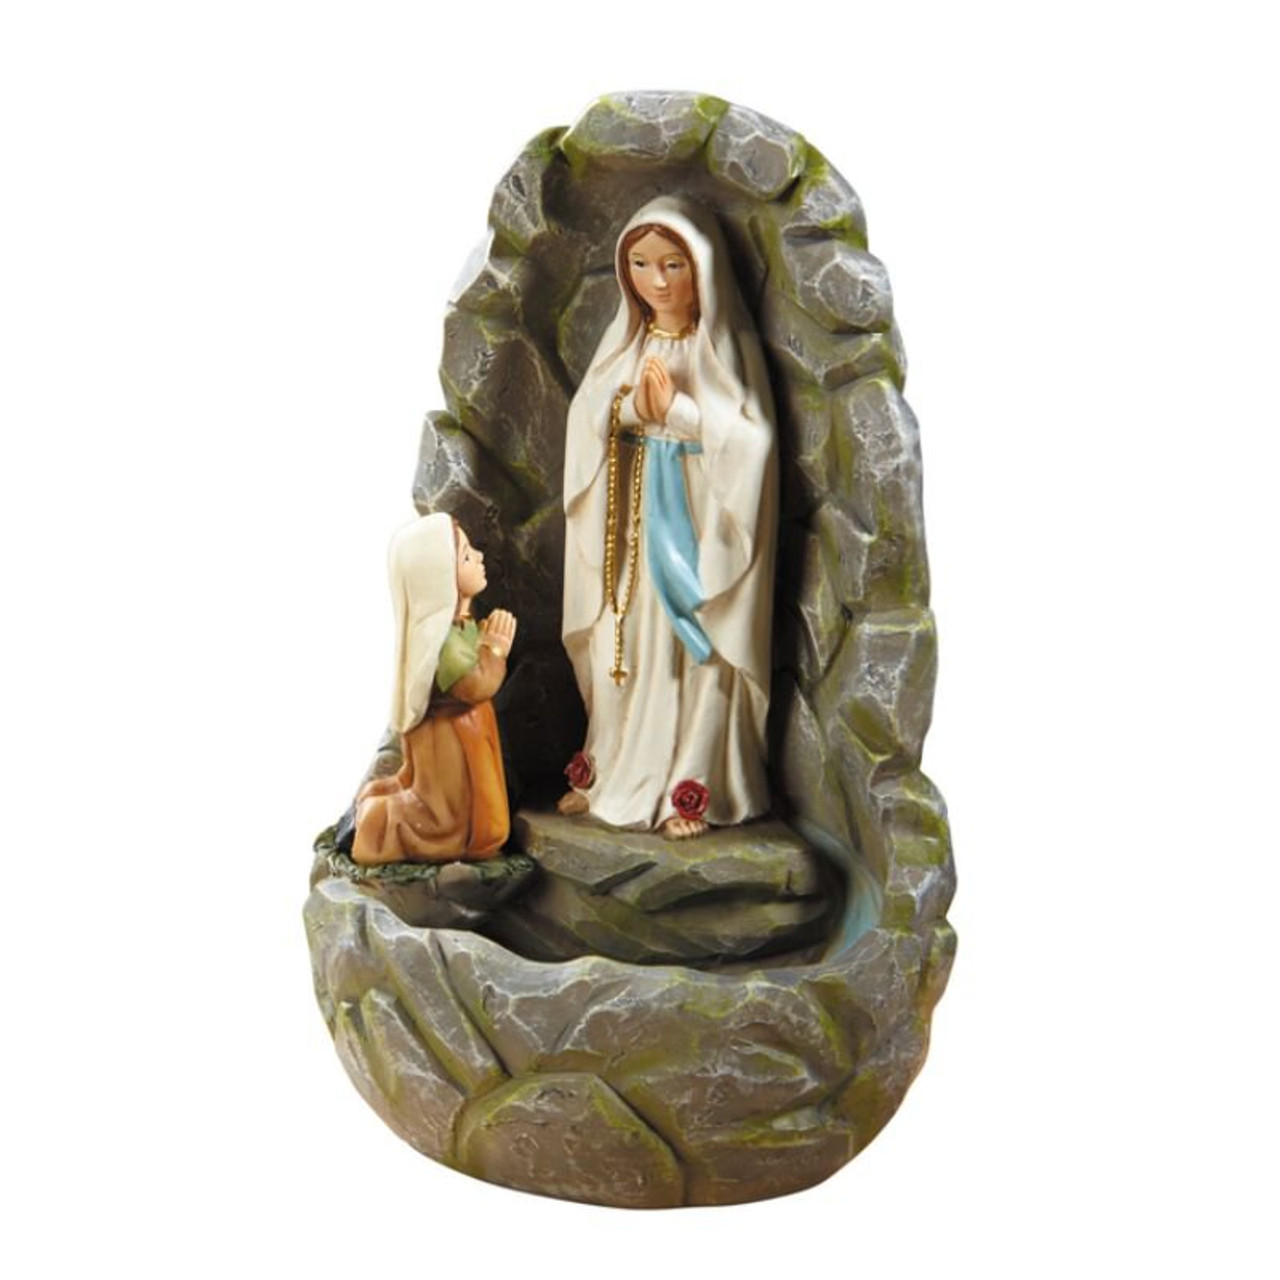 Our Lady of Lourdes St. Bernadette Grotto Holy Water Font - [Consumer]Autom